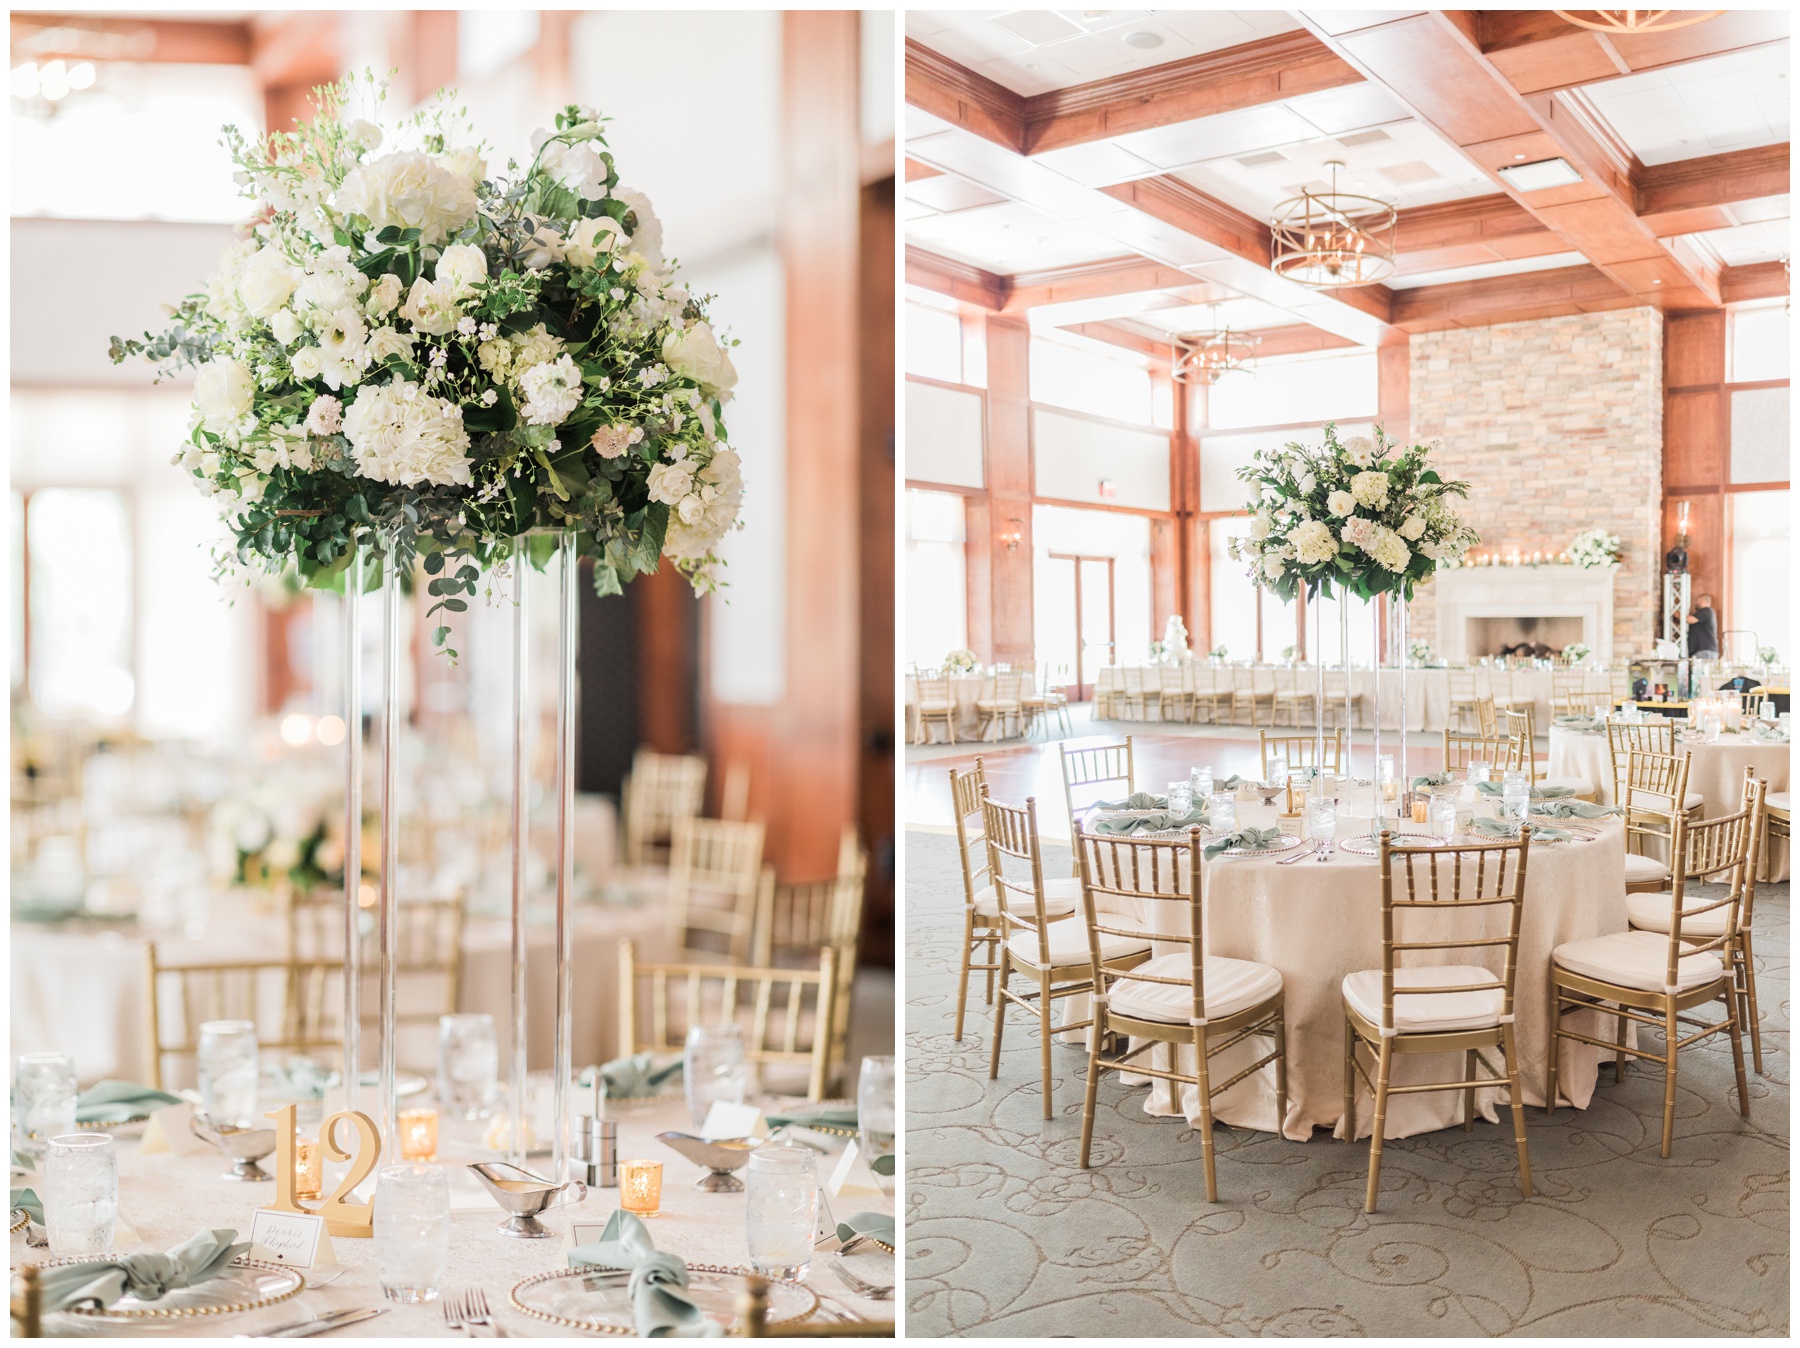 White and blush florals, sage napkins, and gold details for a classic wedding reception